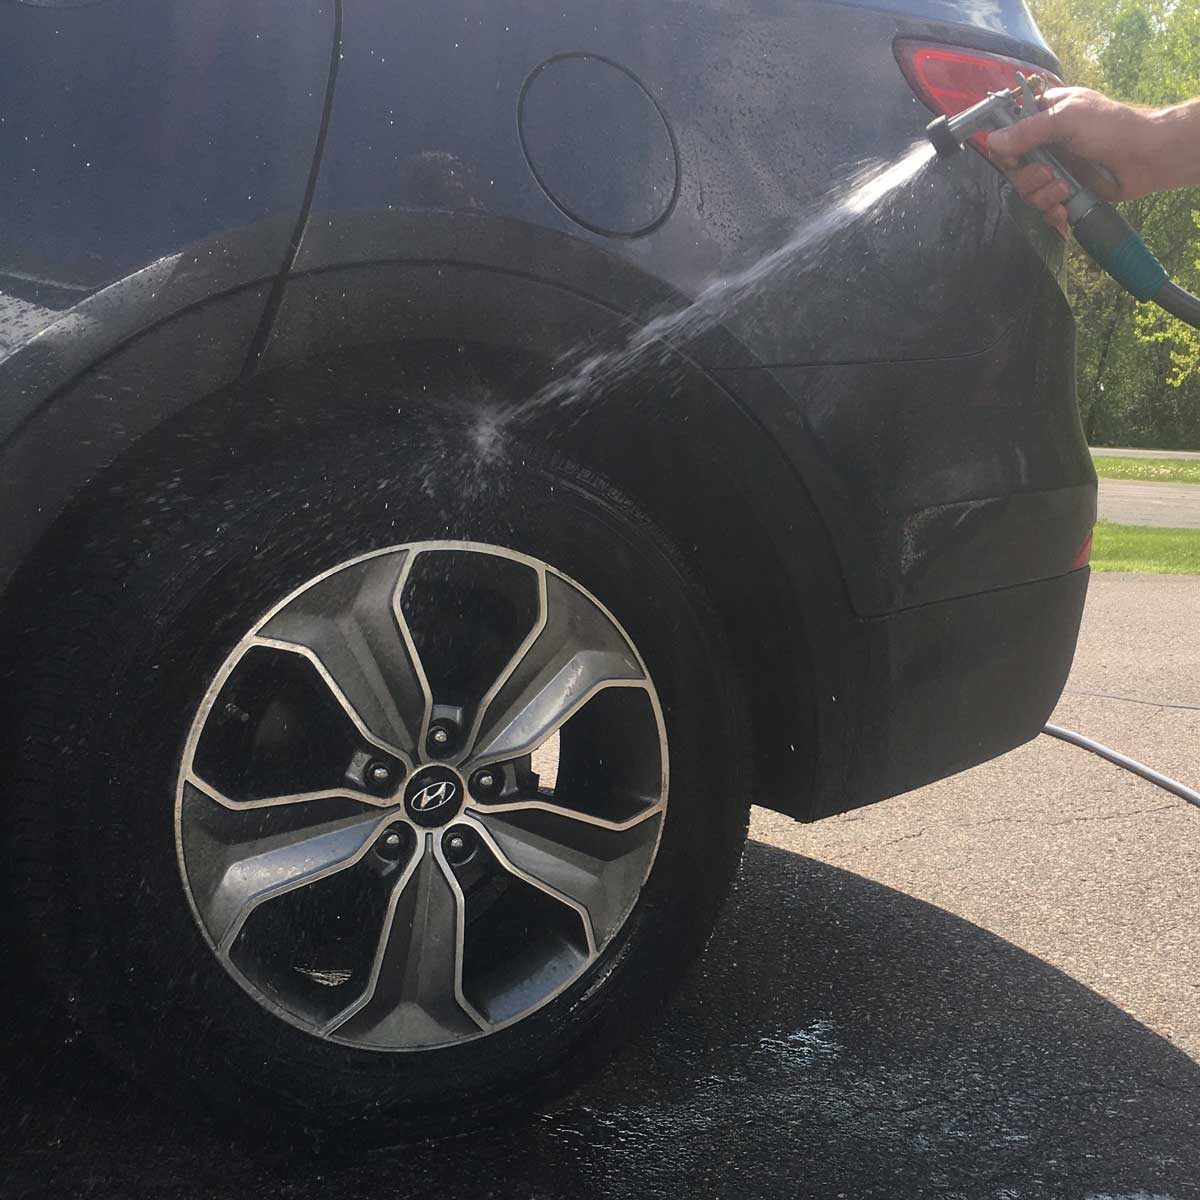 Cleaning tires